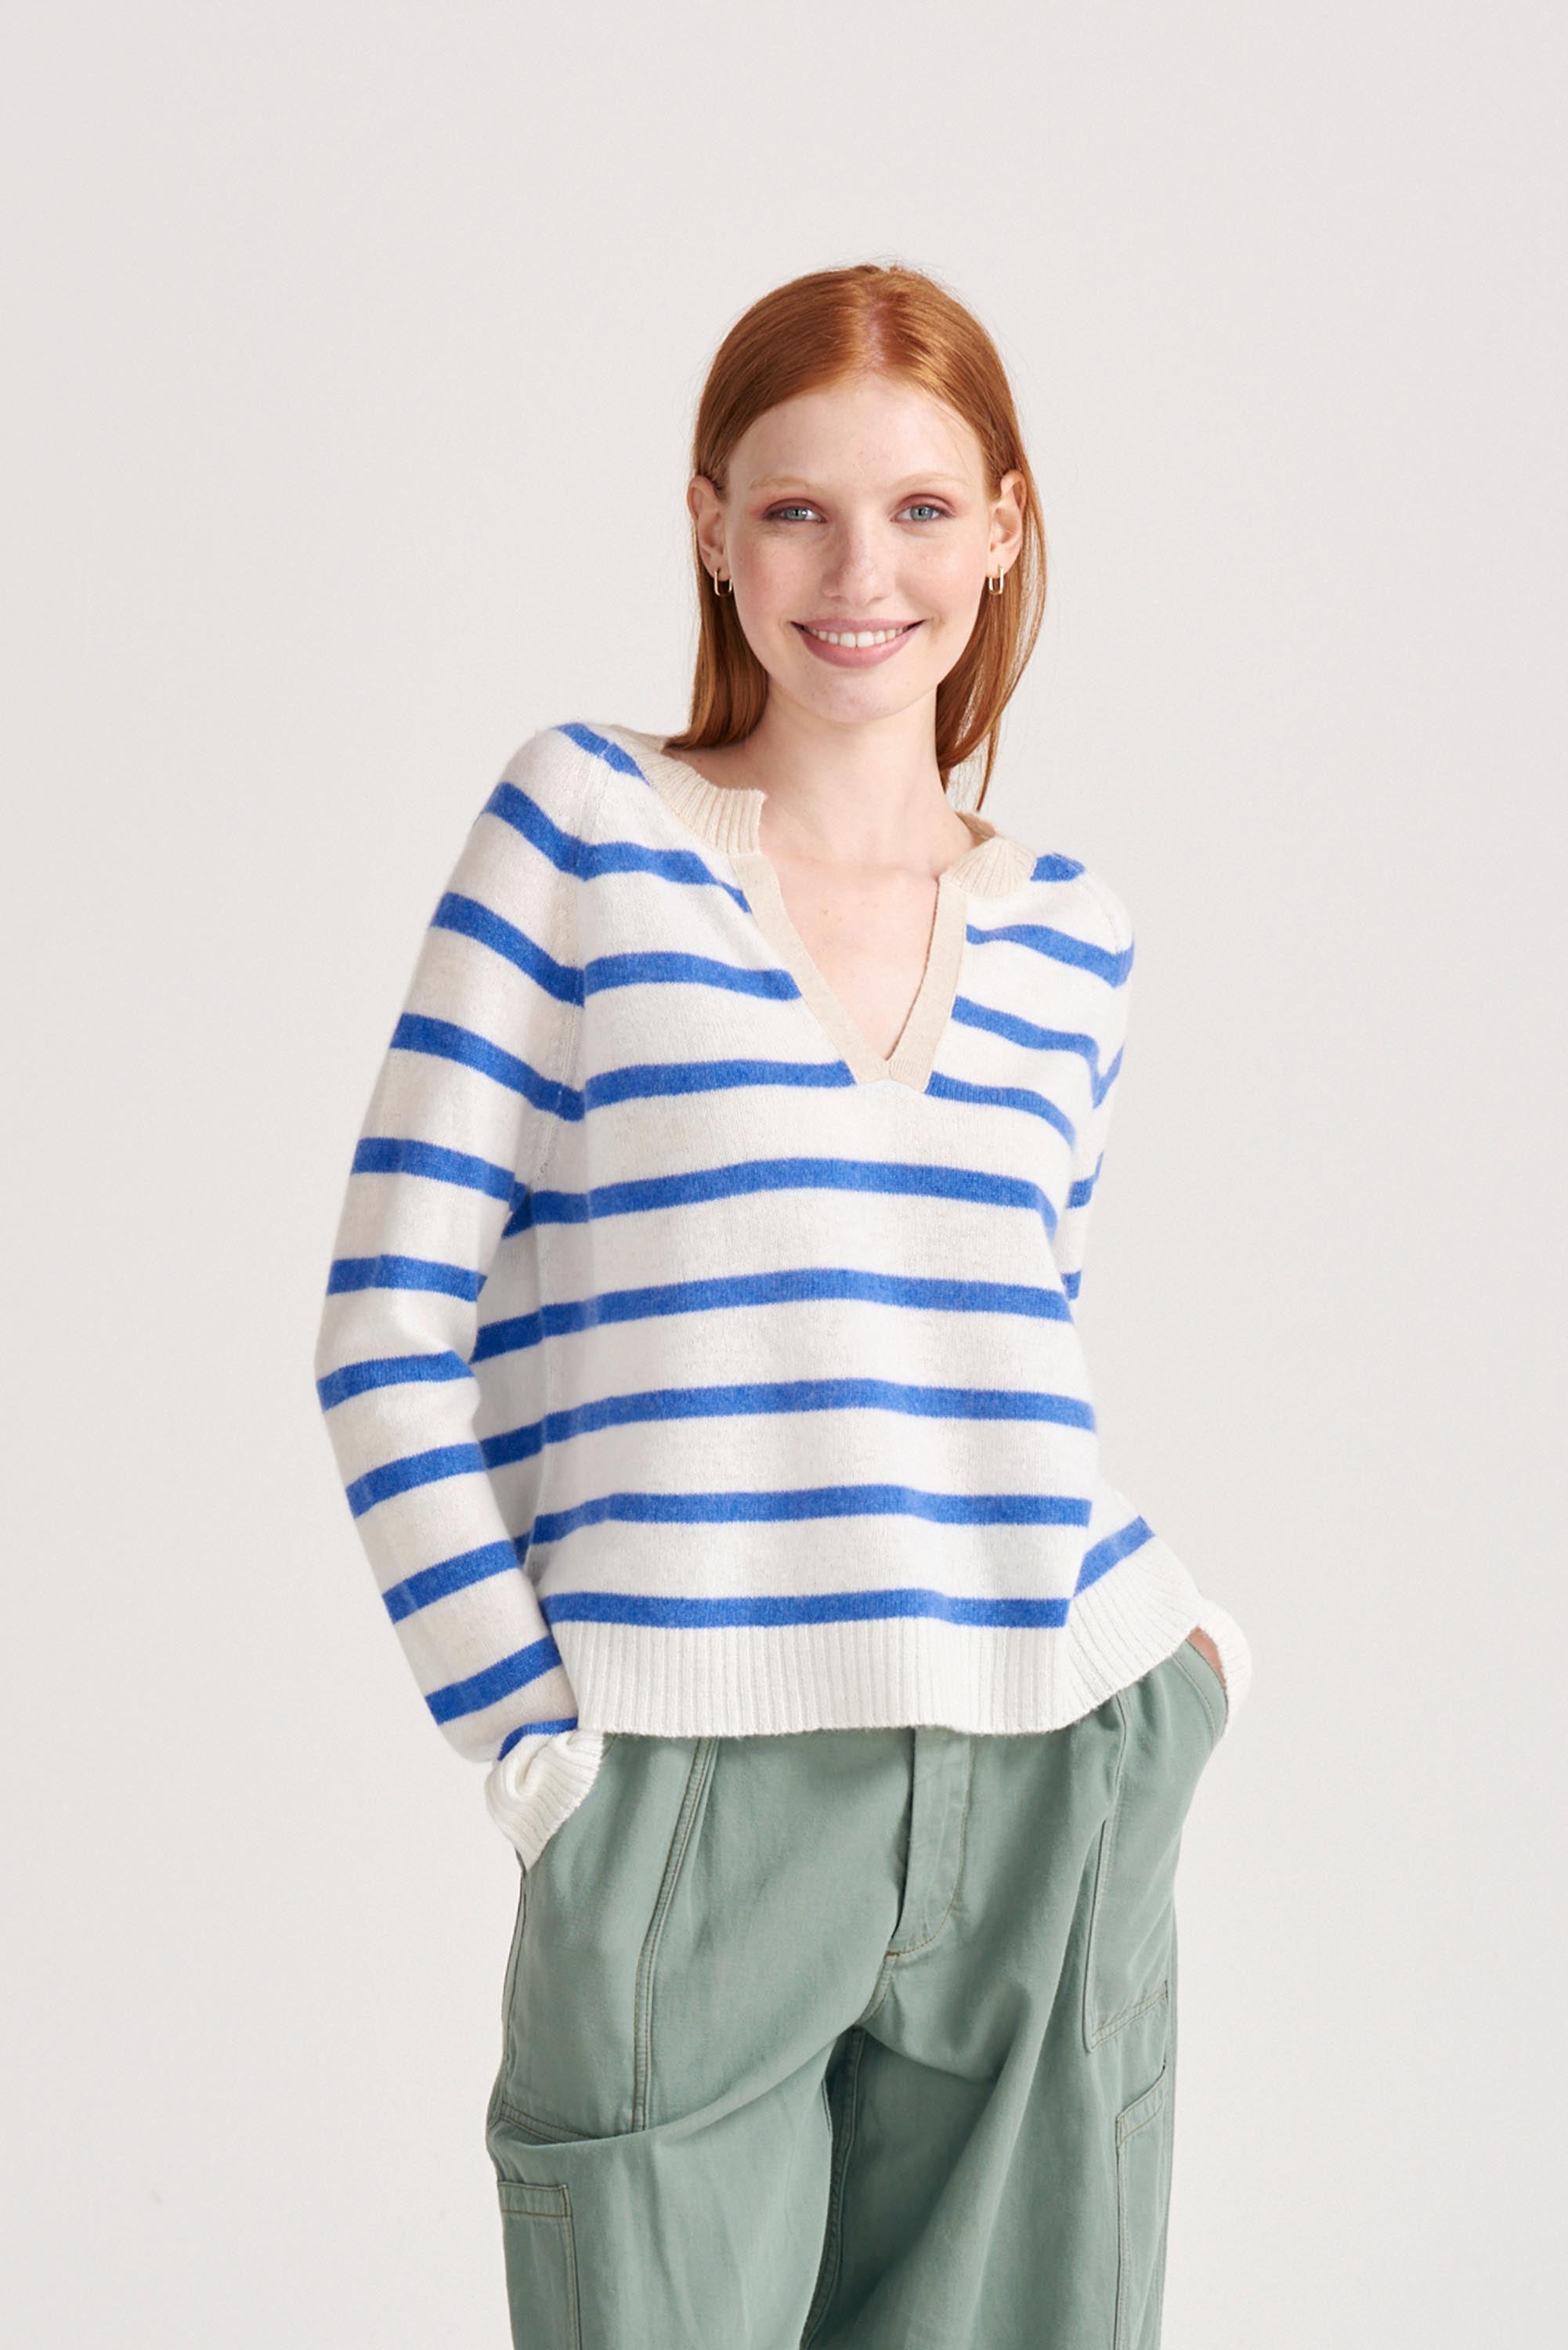 Red haired female model wearing Jumper1234 Periwinkle blue and cream stripe cashmere jumper with open collar in contrast oatmeal